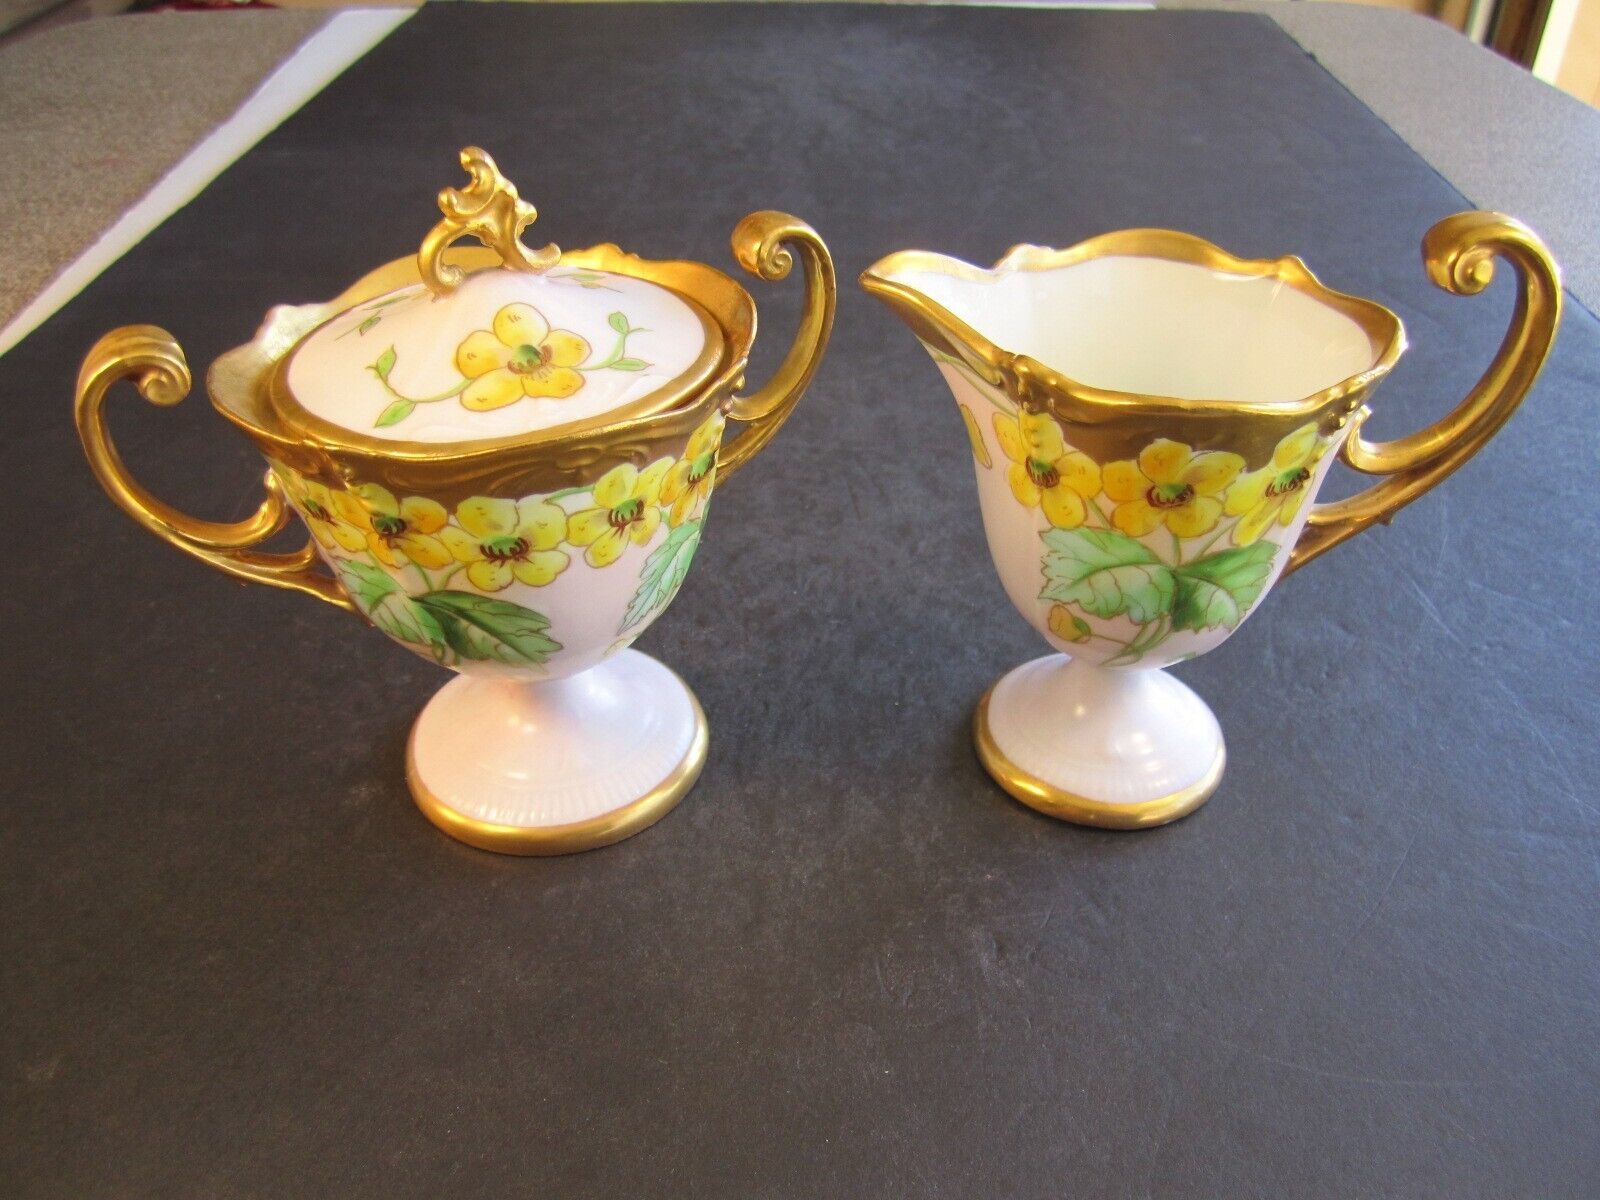 Petite Antique Pickard China Floral & Gold Over Pink Covered Sugar & Creamer Set